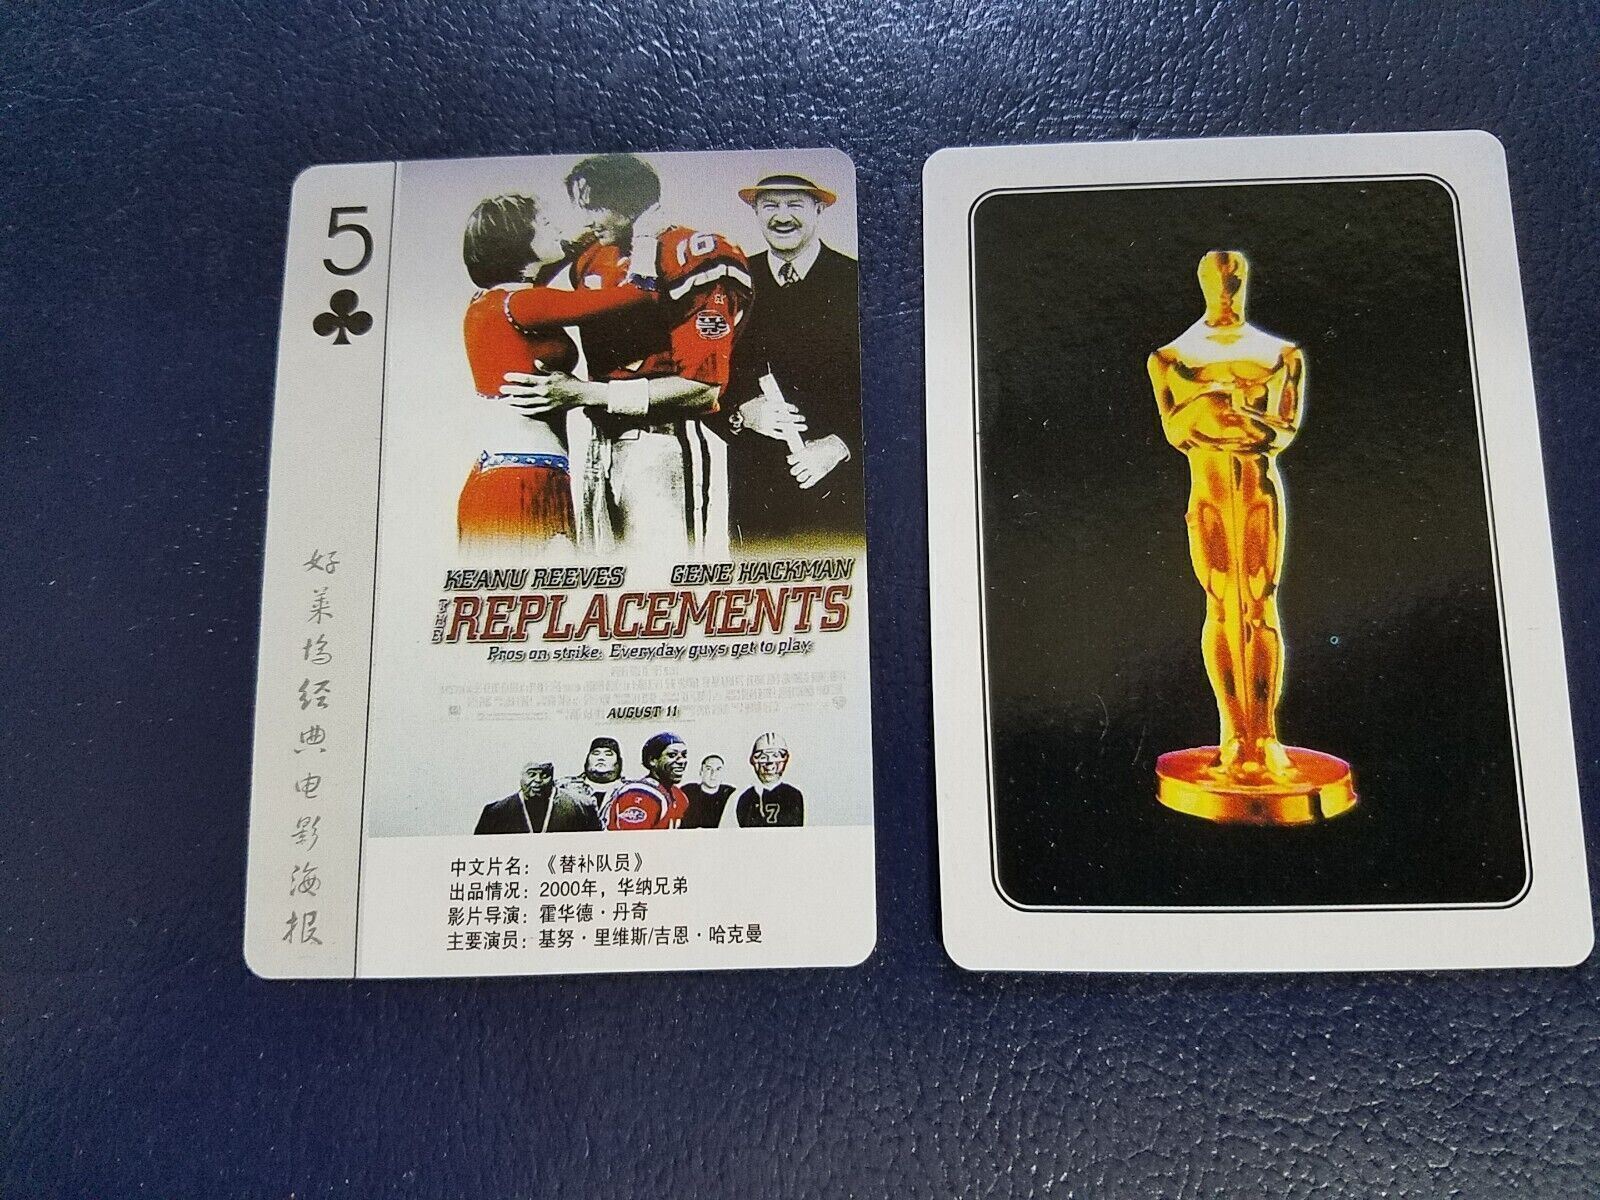 Keanu Reeves Gene Hackman Brooke Langton The Replacements Hollywood Playing Card